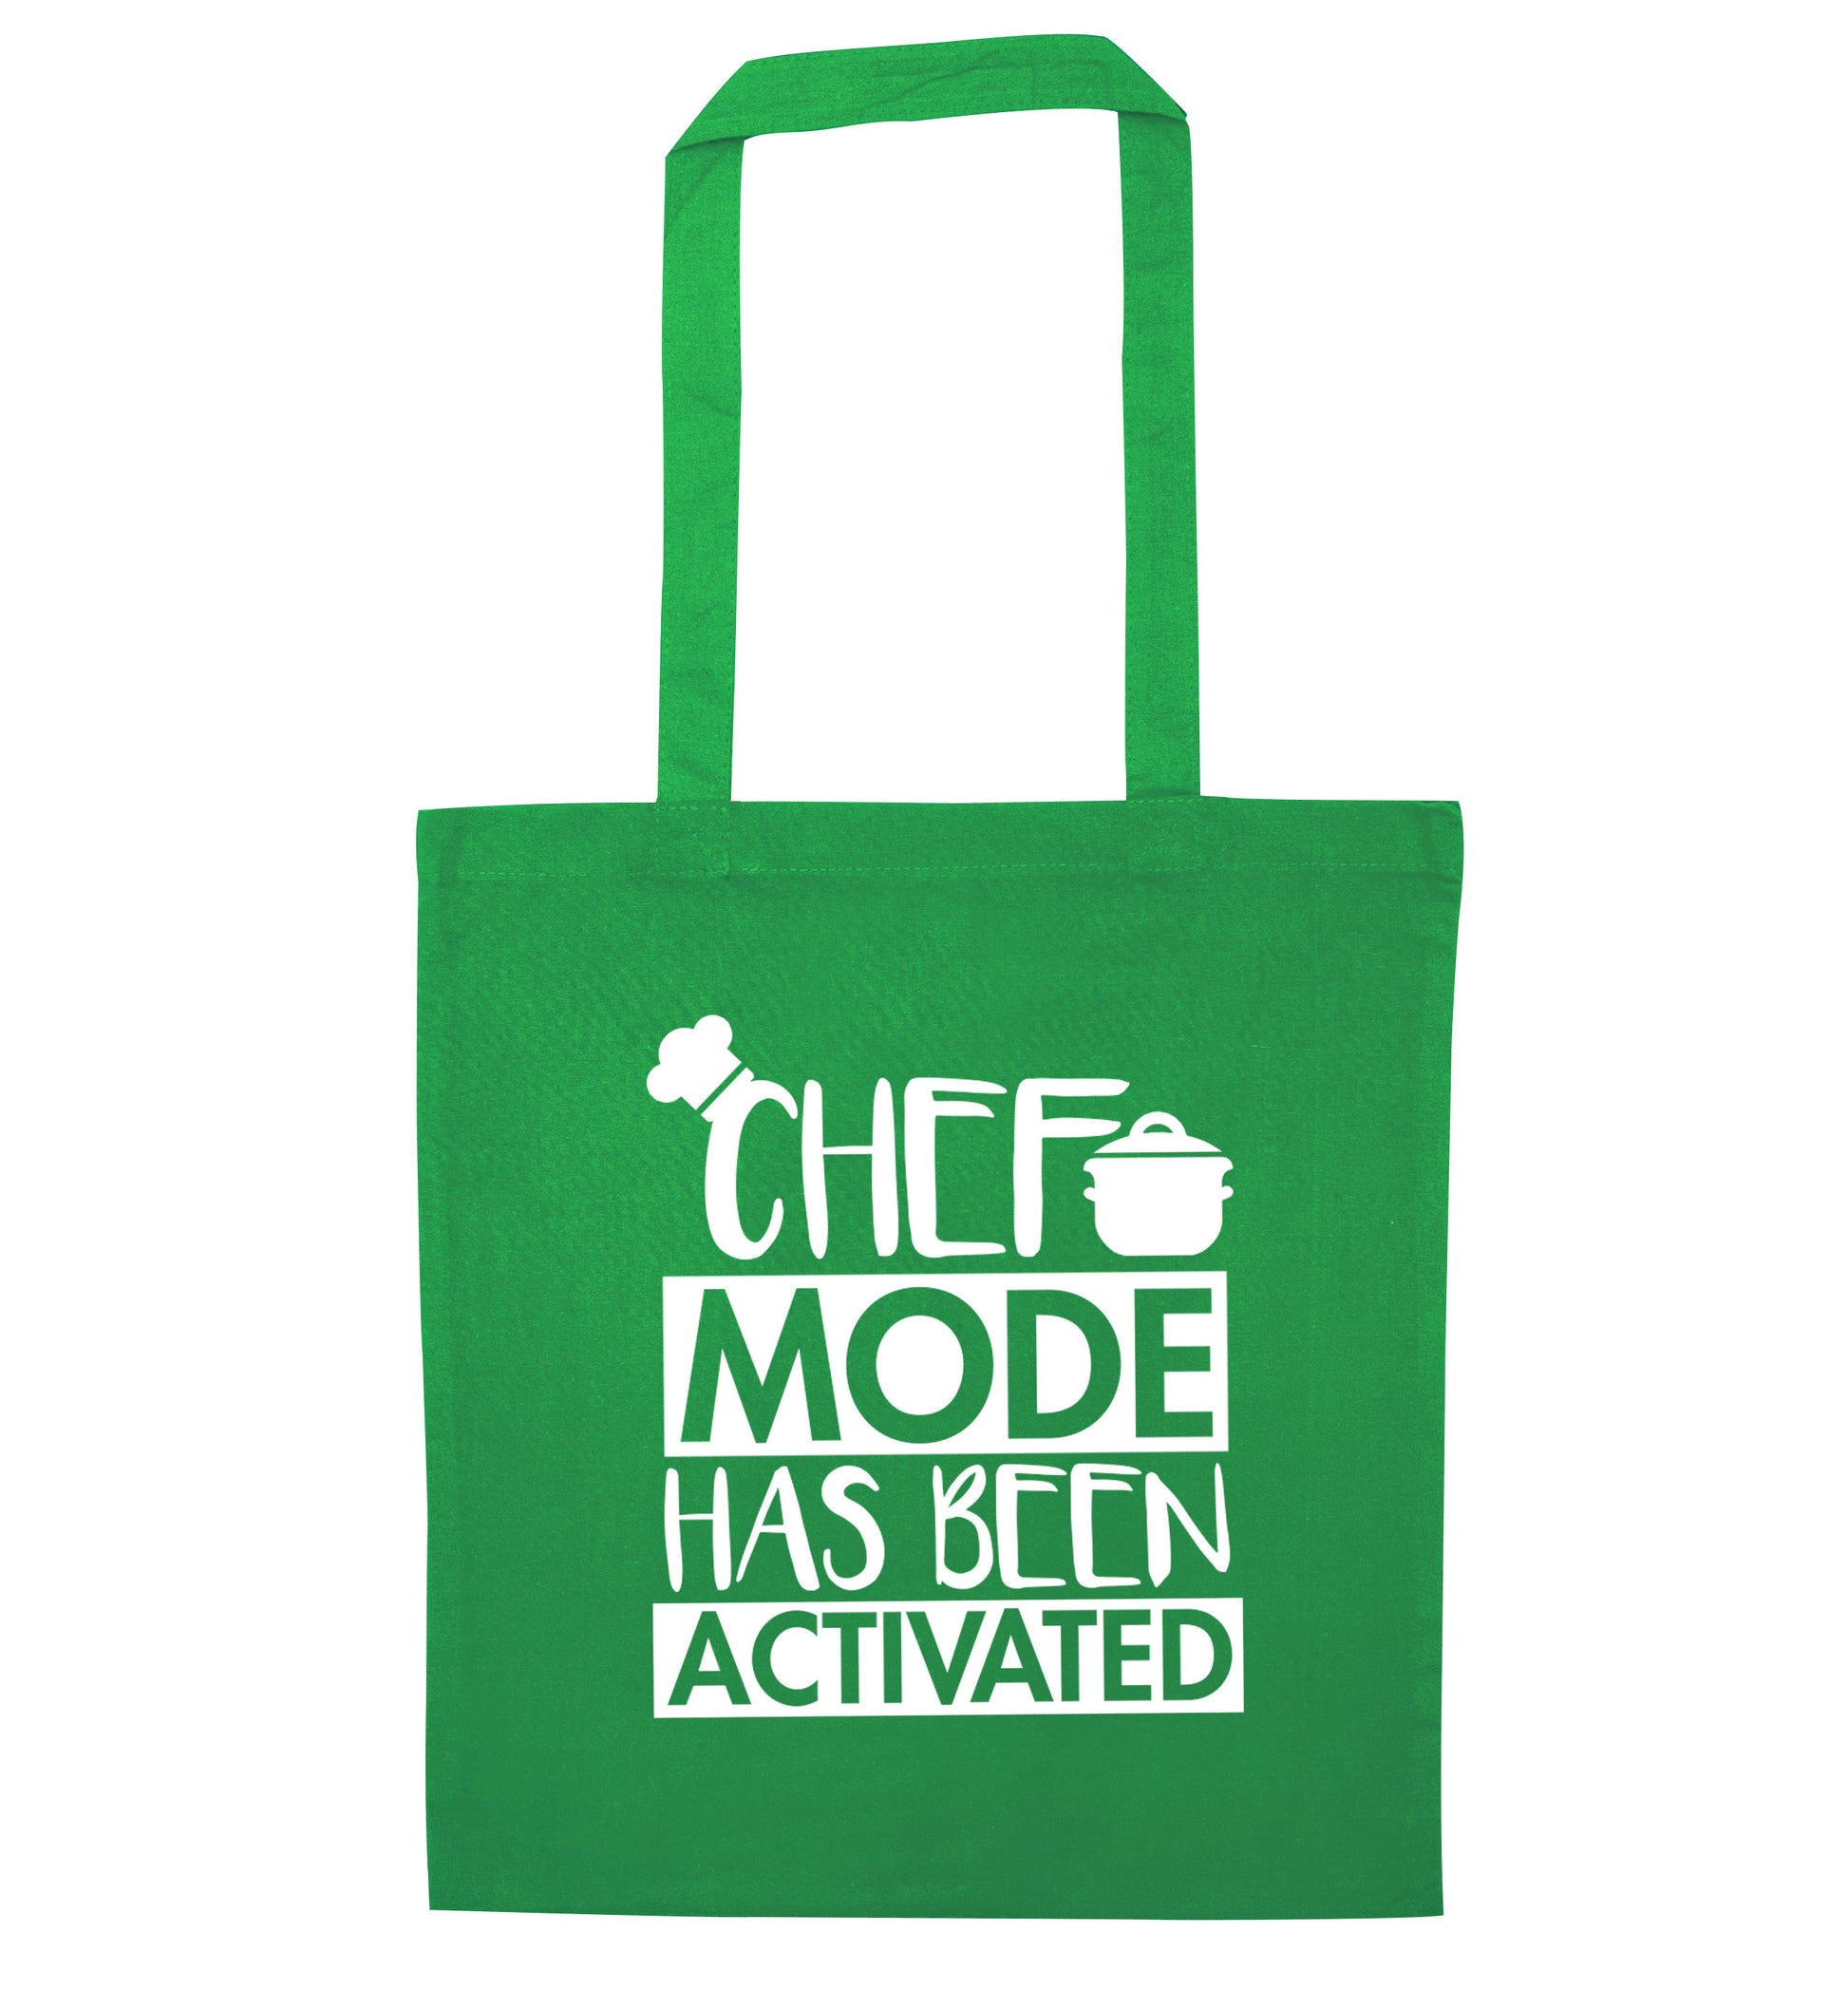 Chef mode has been activated green tote bag